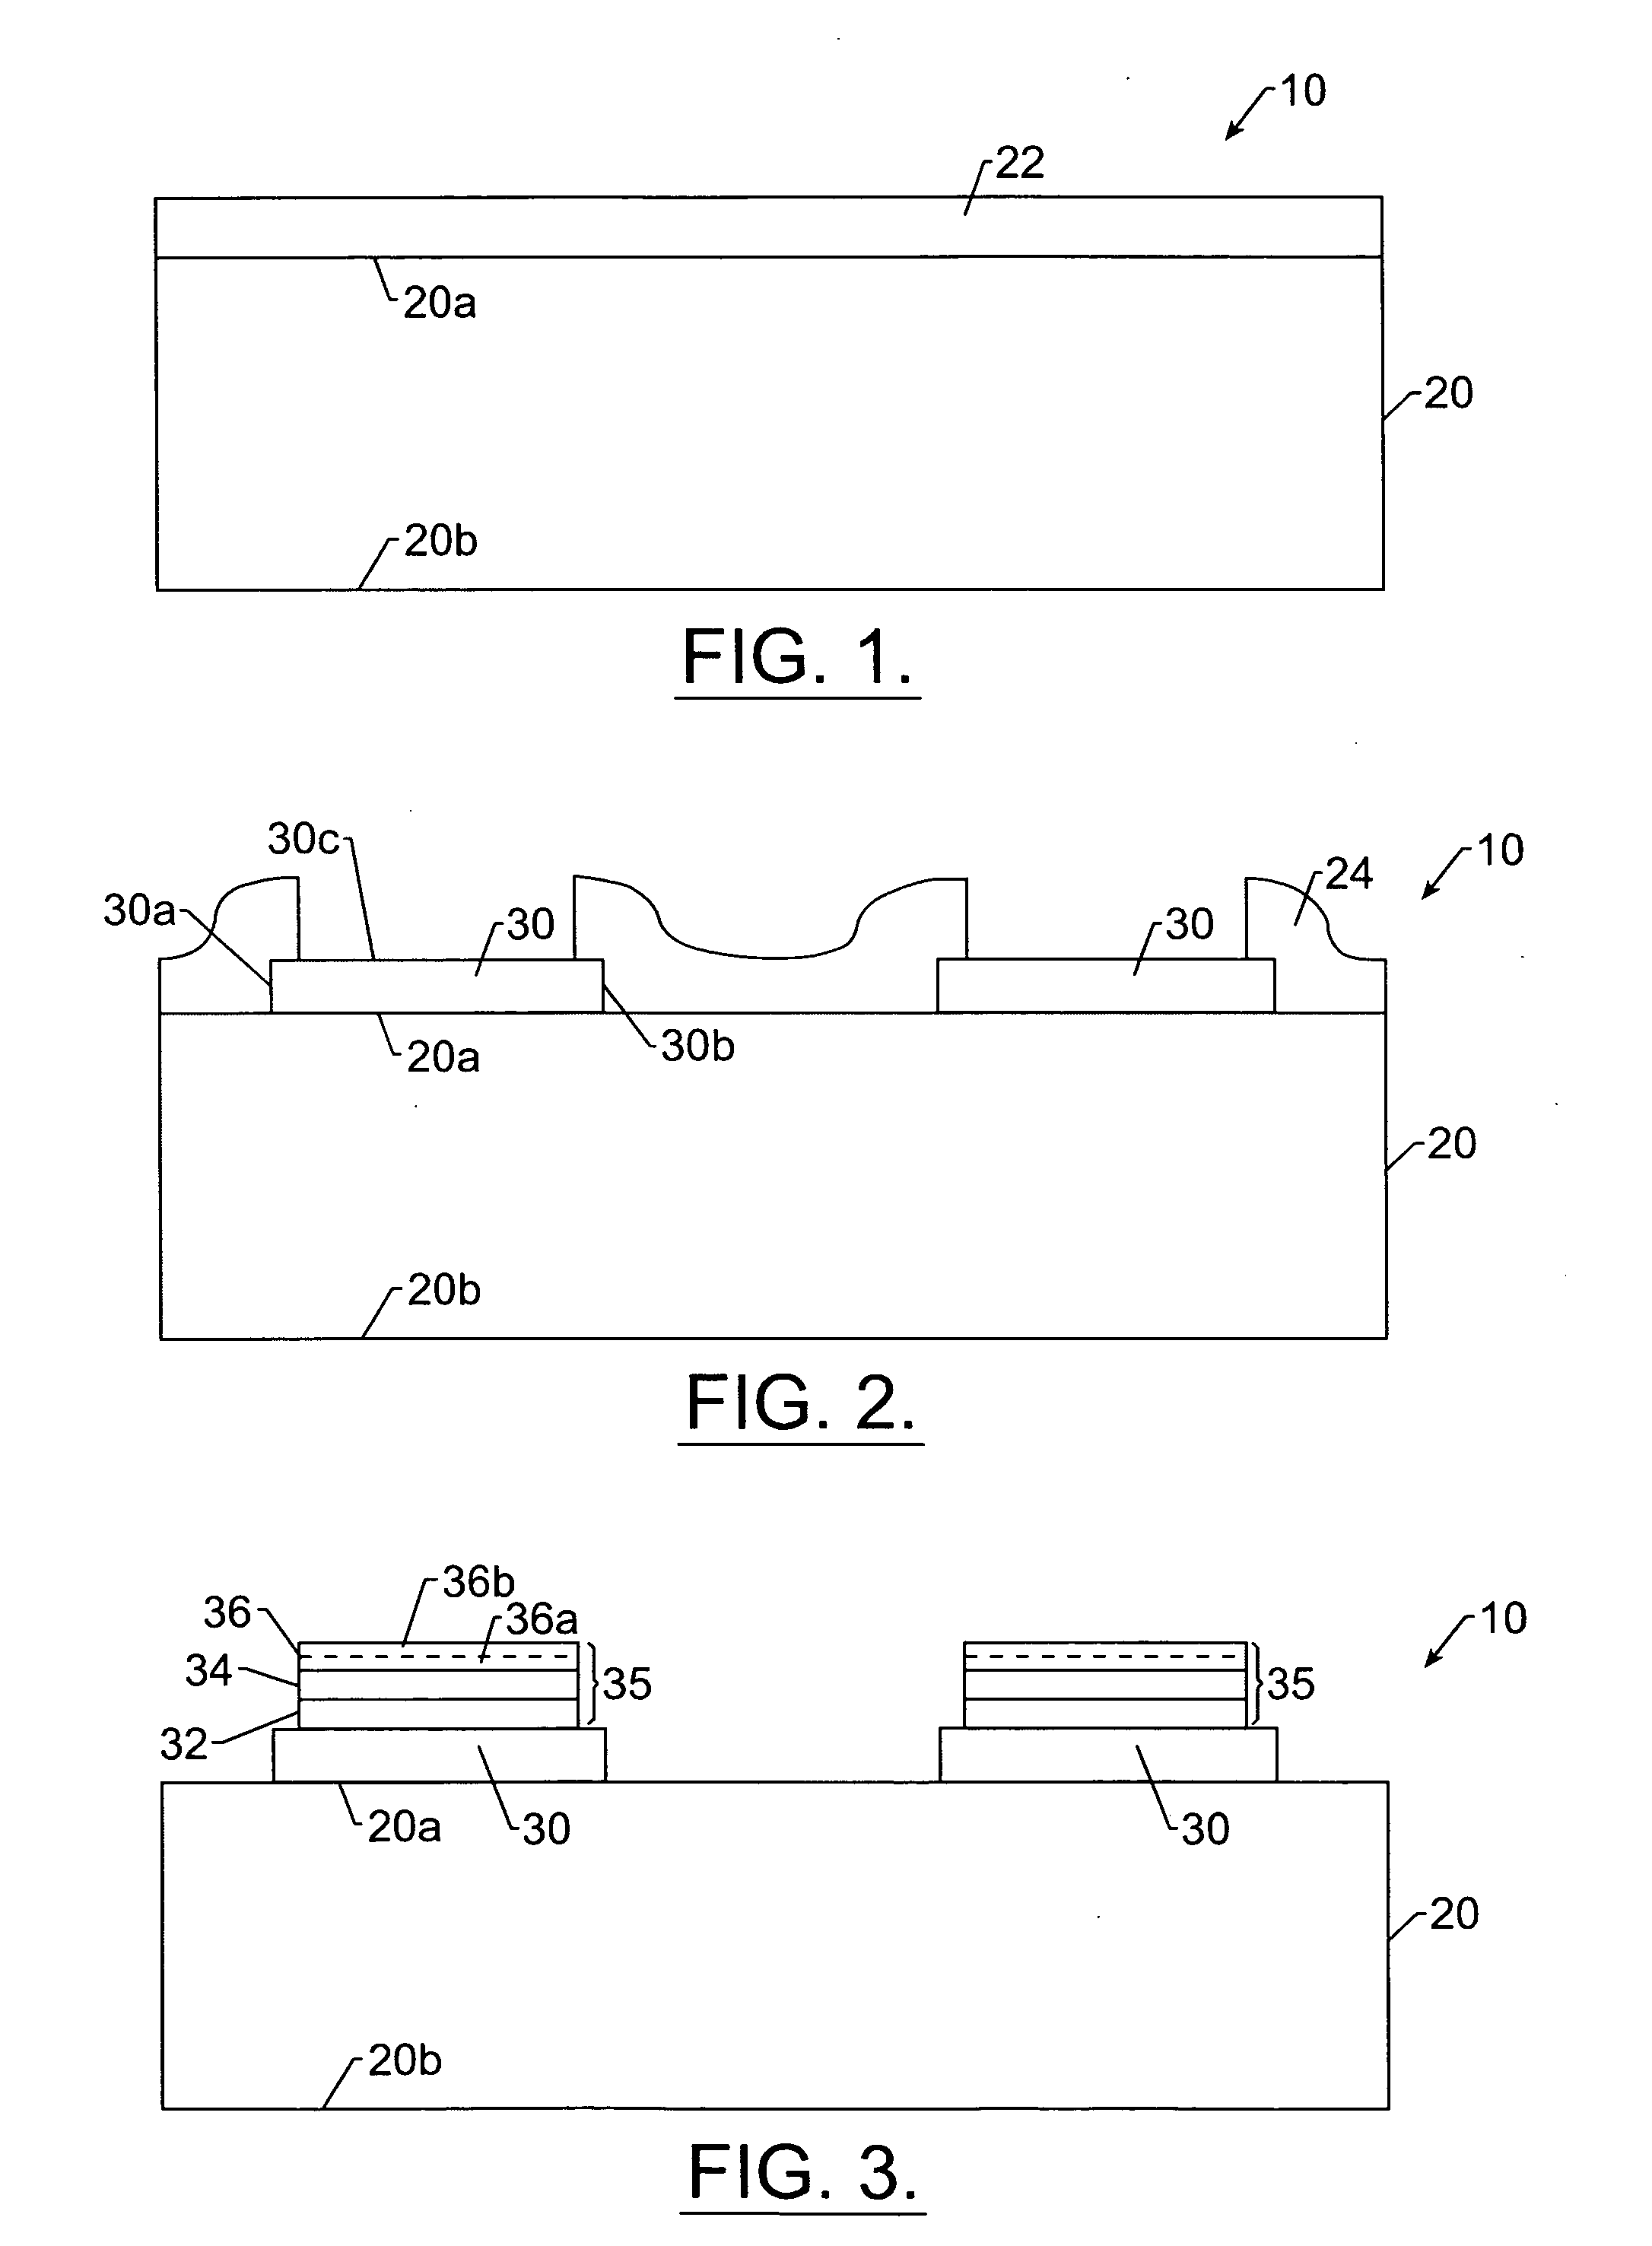 Methods of fabricating light emitting devices using mesa regions and passivation layers